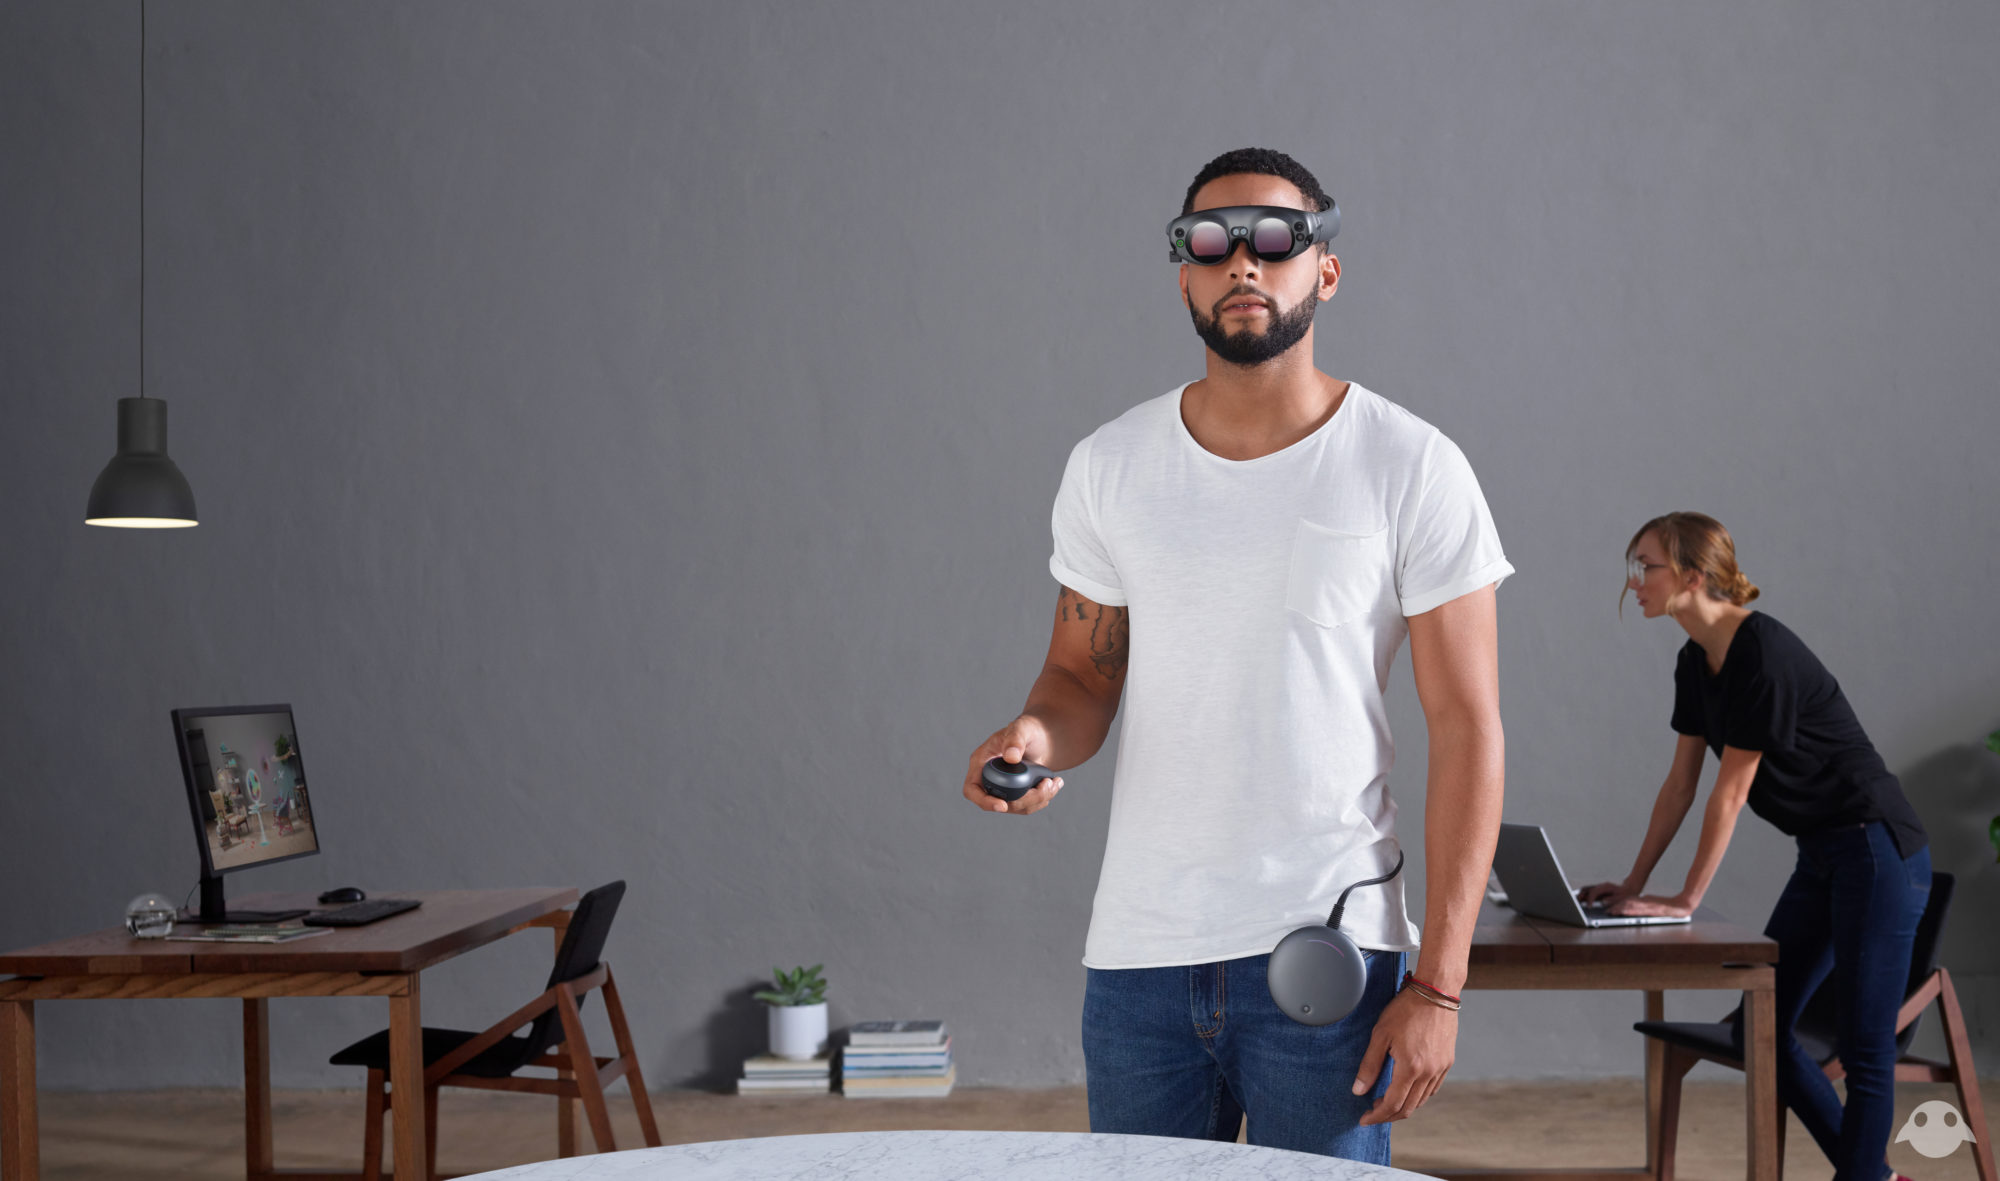 A man wearing a white t-shirt and blue jeans looks into the distance while holding a remote in his hand and wearing a Magic Leap VR headset. In the background, there are two wooden workstations with computers and a woman wearing blue jeans and a black t-shirt standing behind one computer.